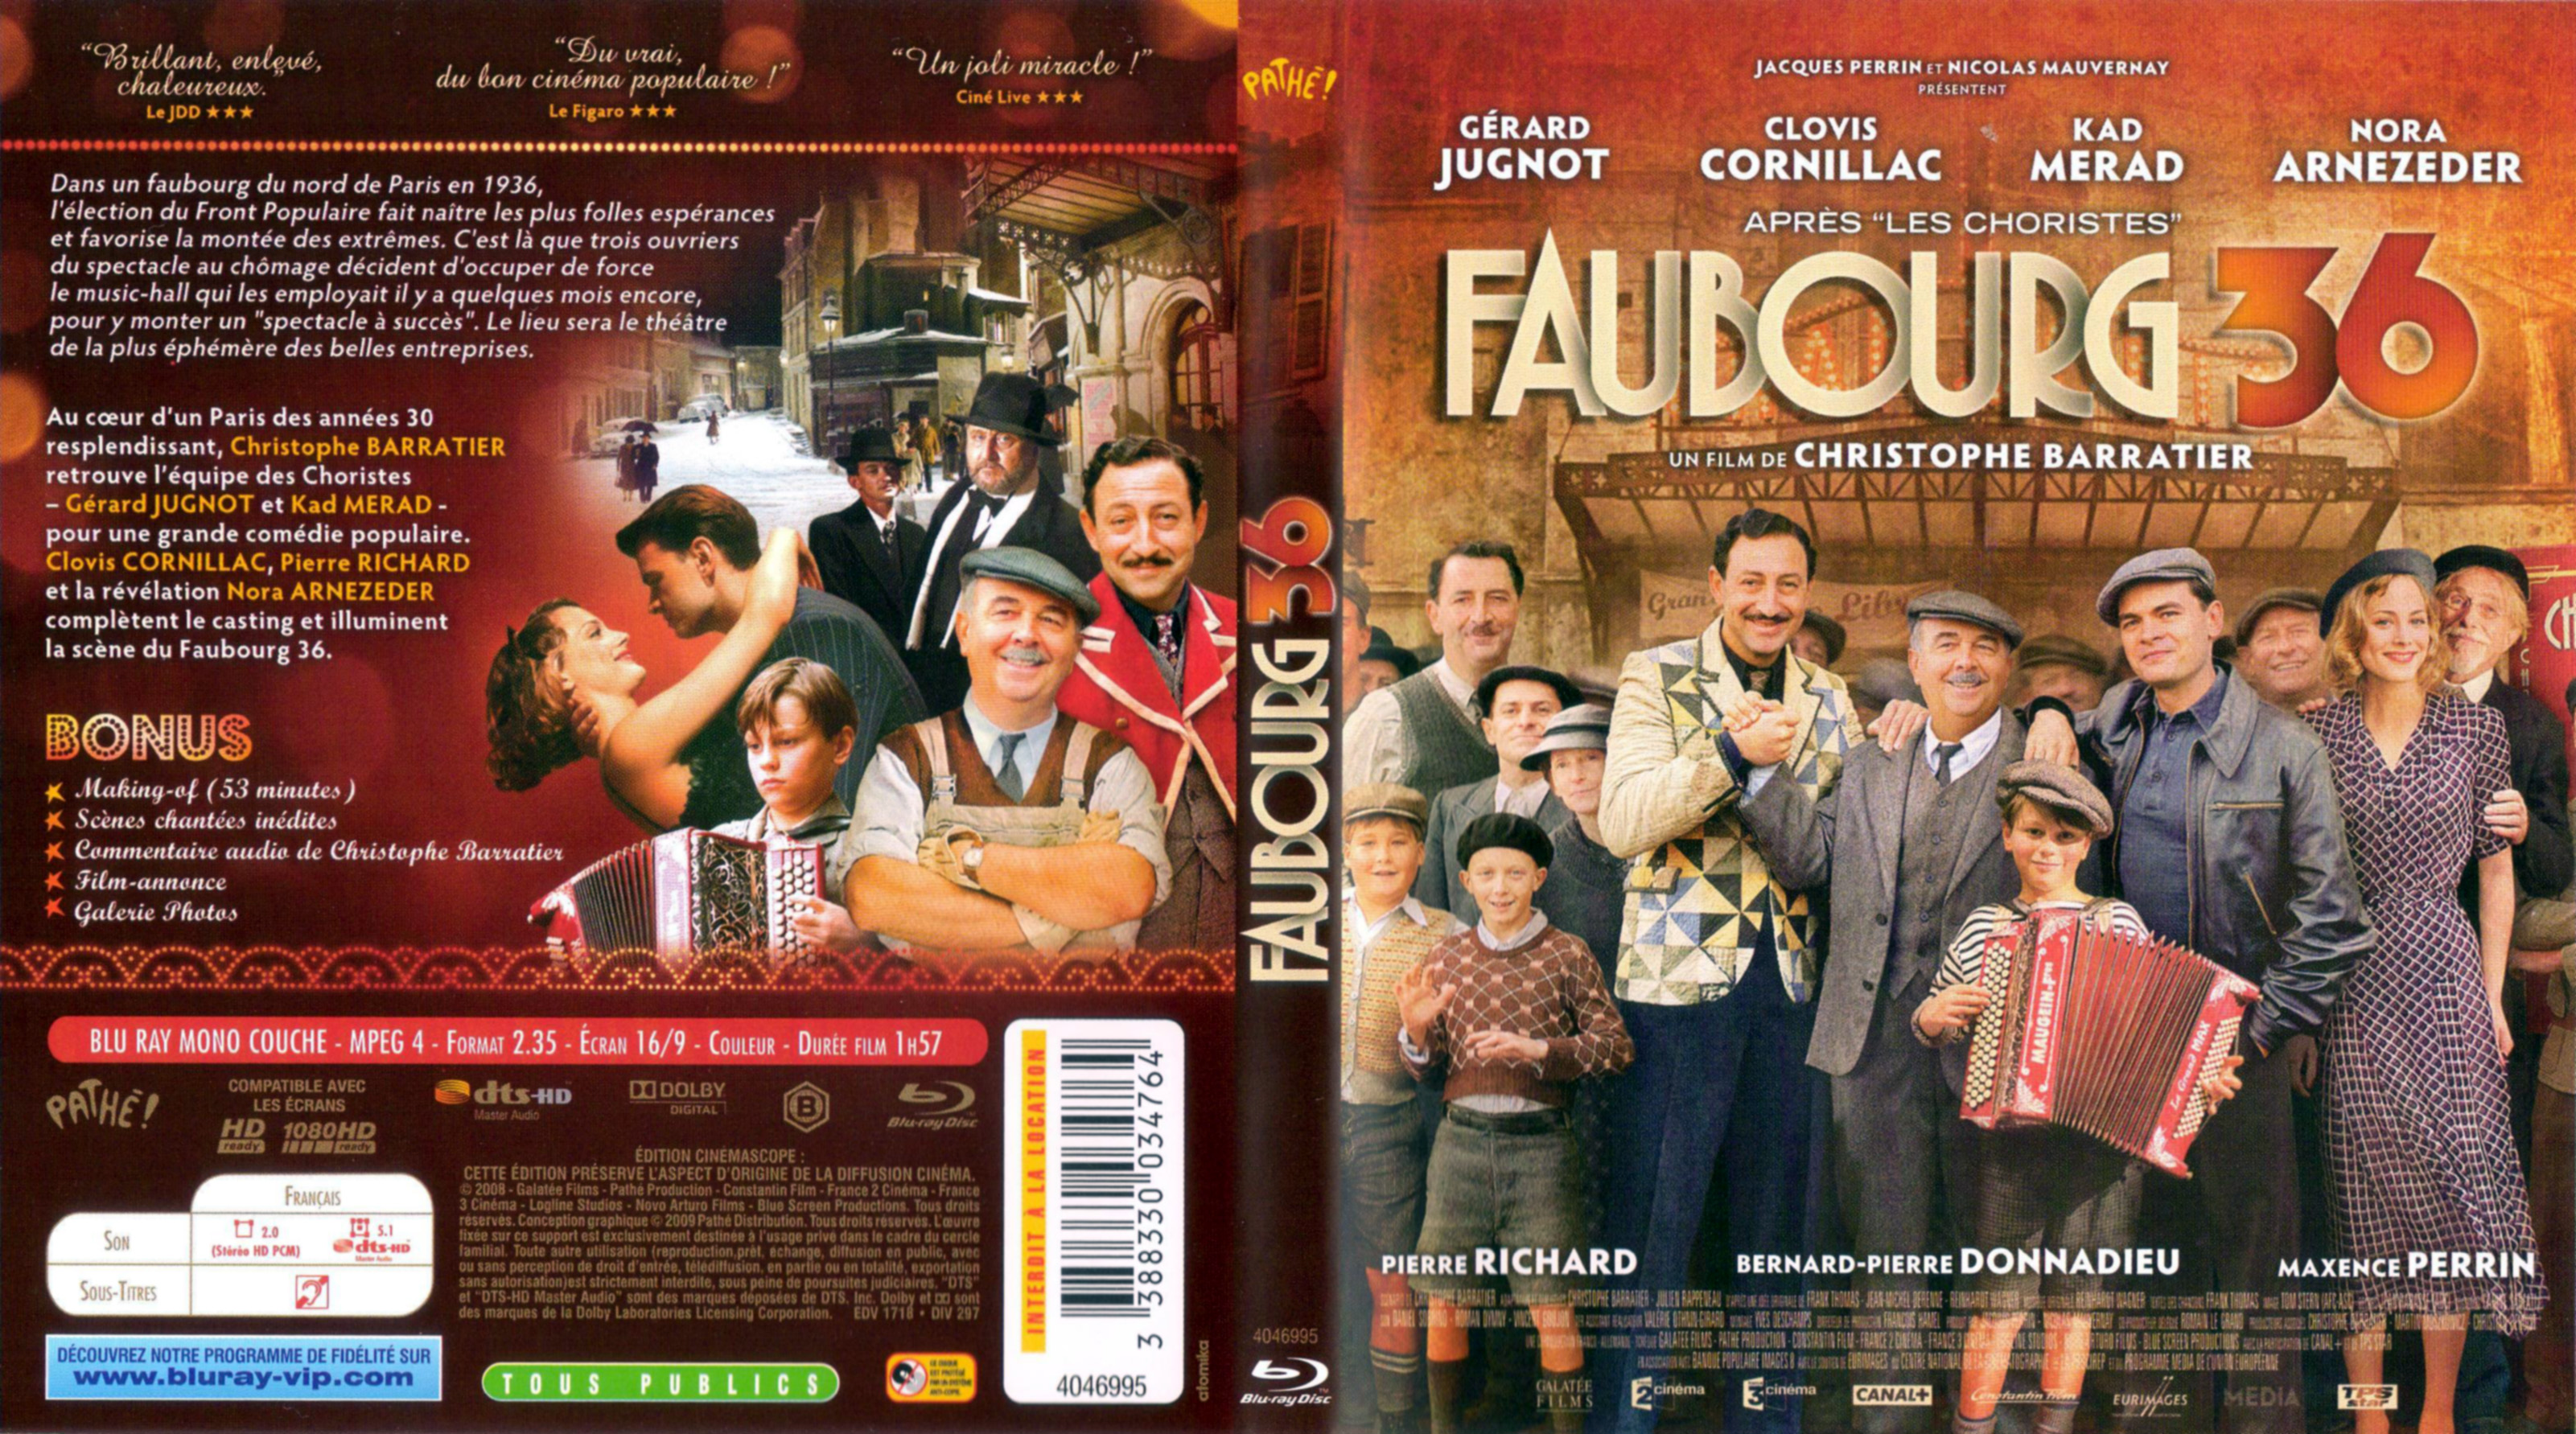 Jaquette DVD Faubourg 36 (BLU-RAY)